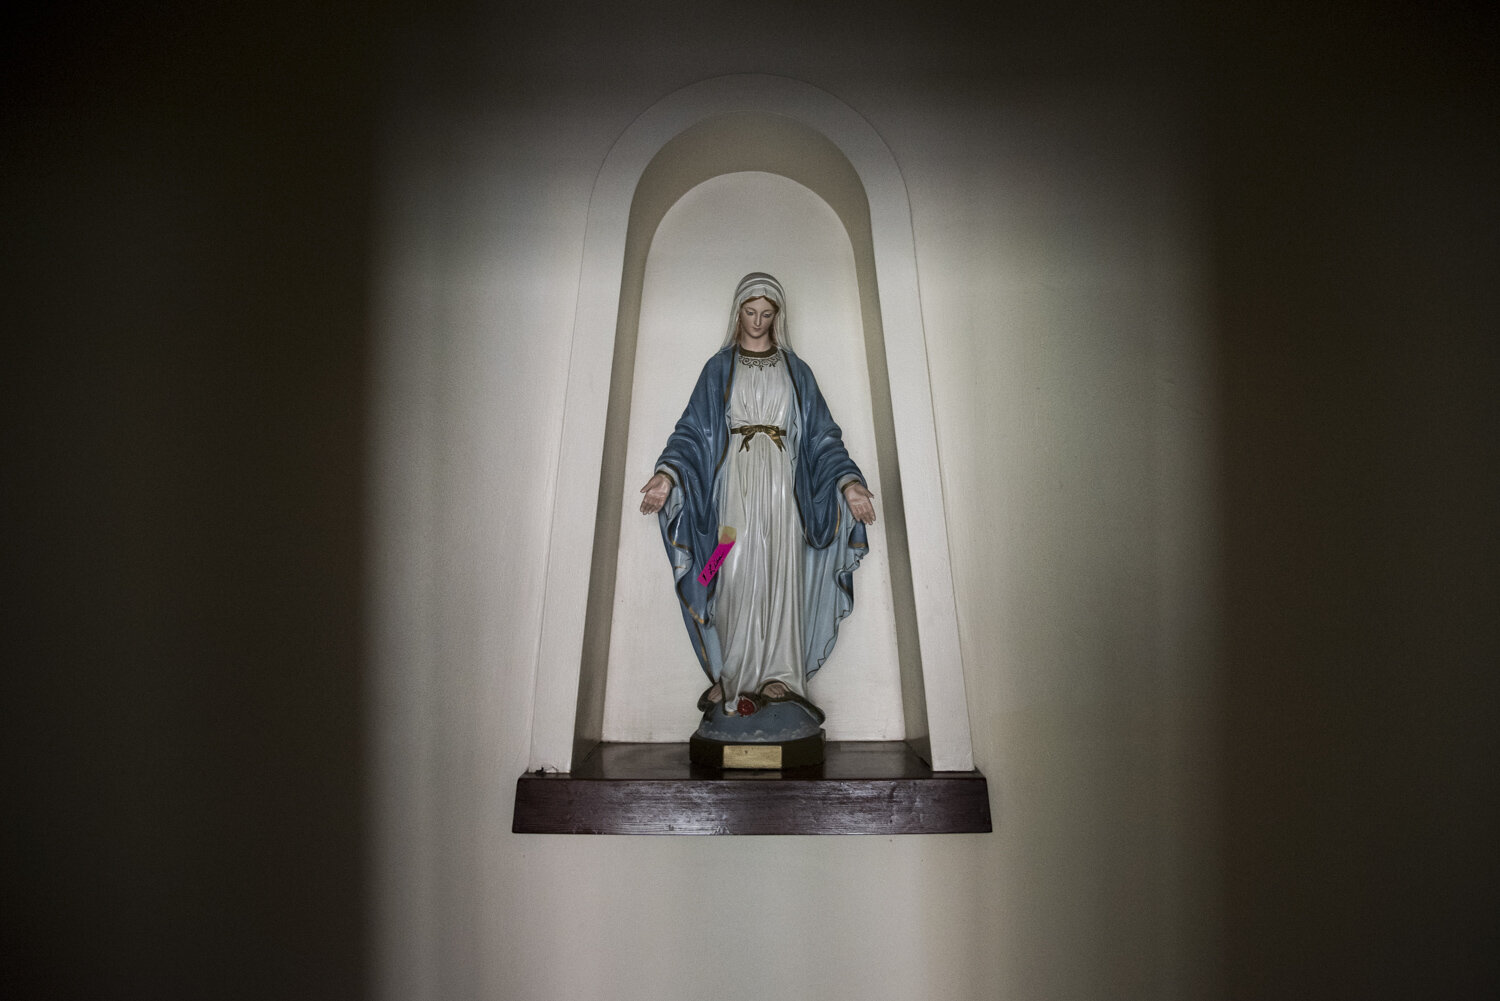  Statue of Our Lady with a pink label.    St. Anthony's Convent, Soho, NYC, May 18, 2018 